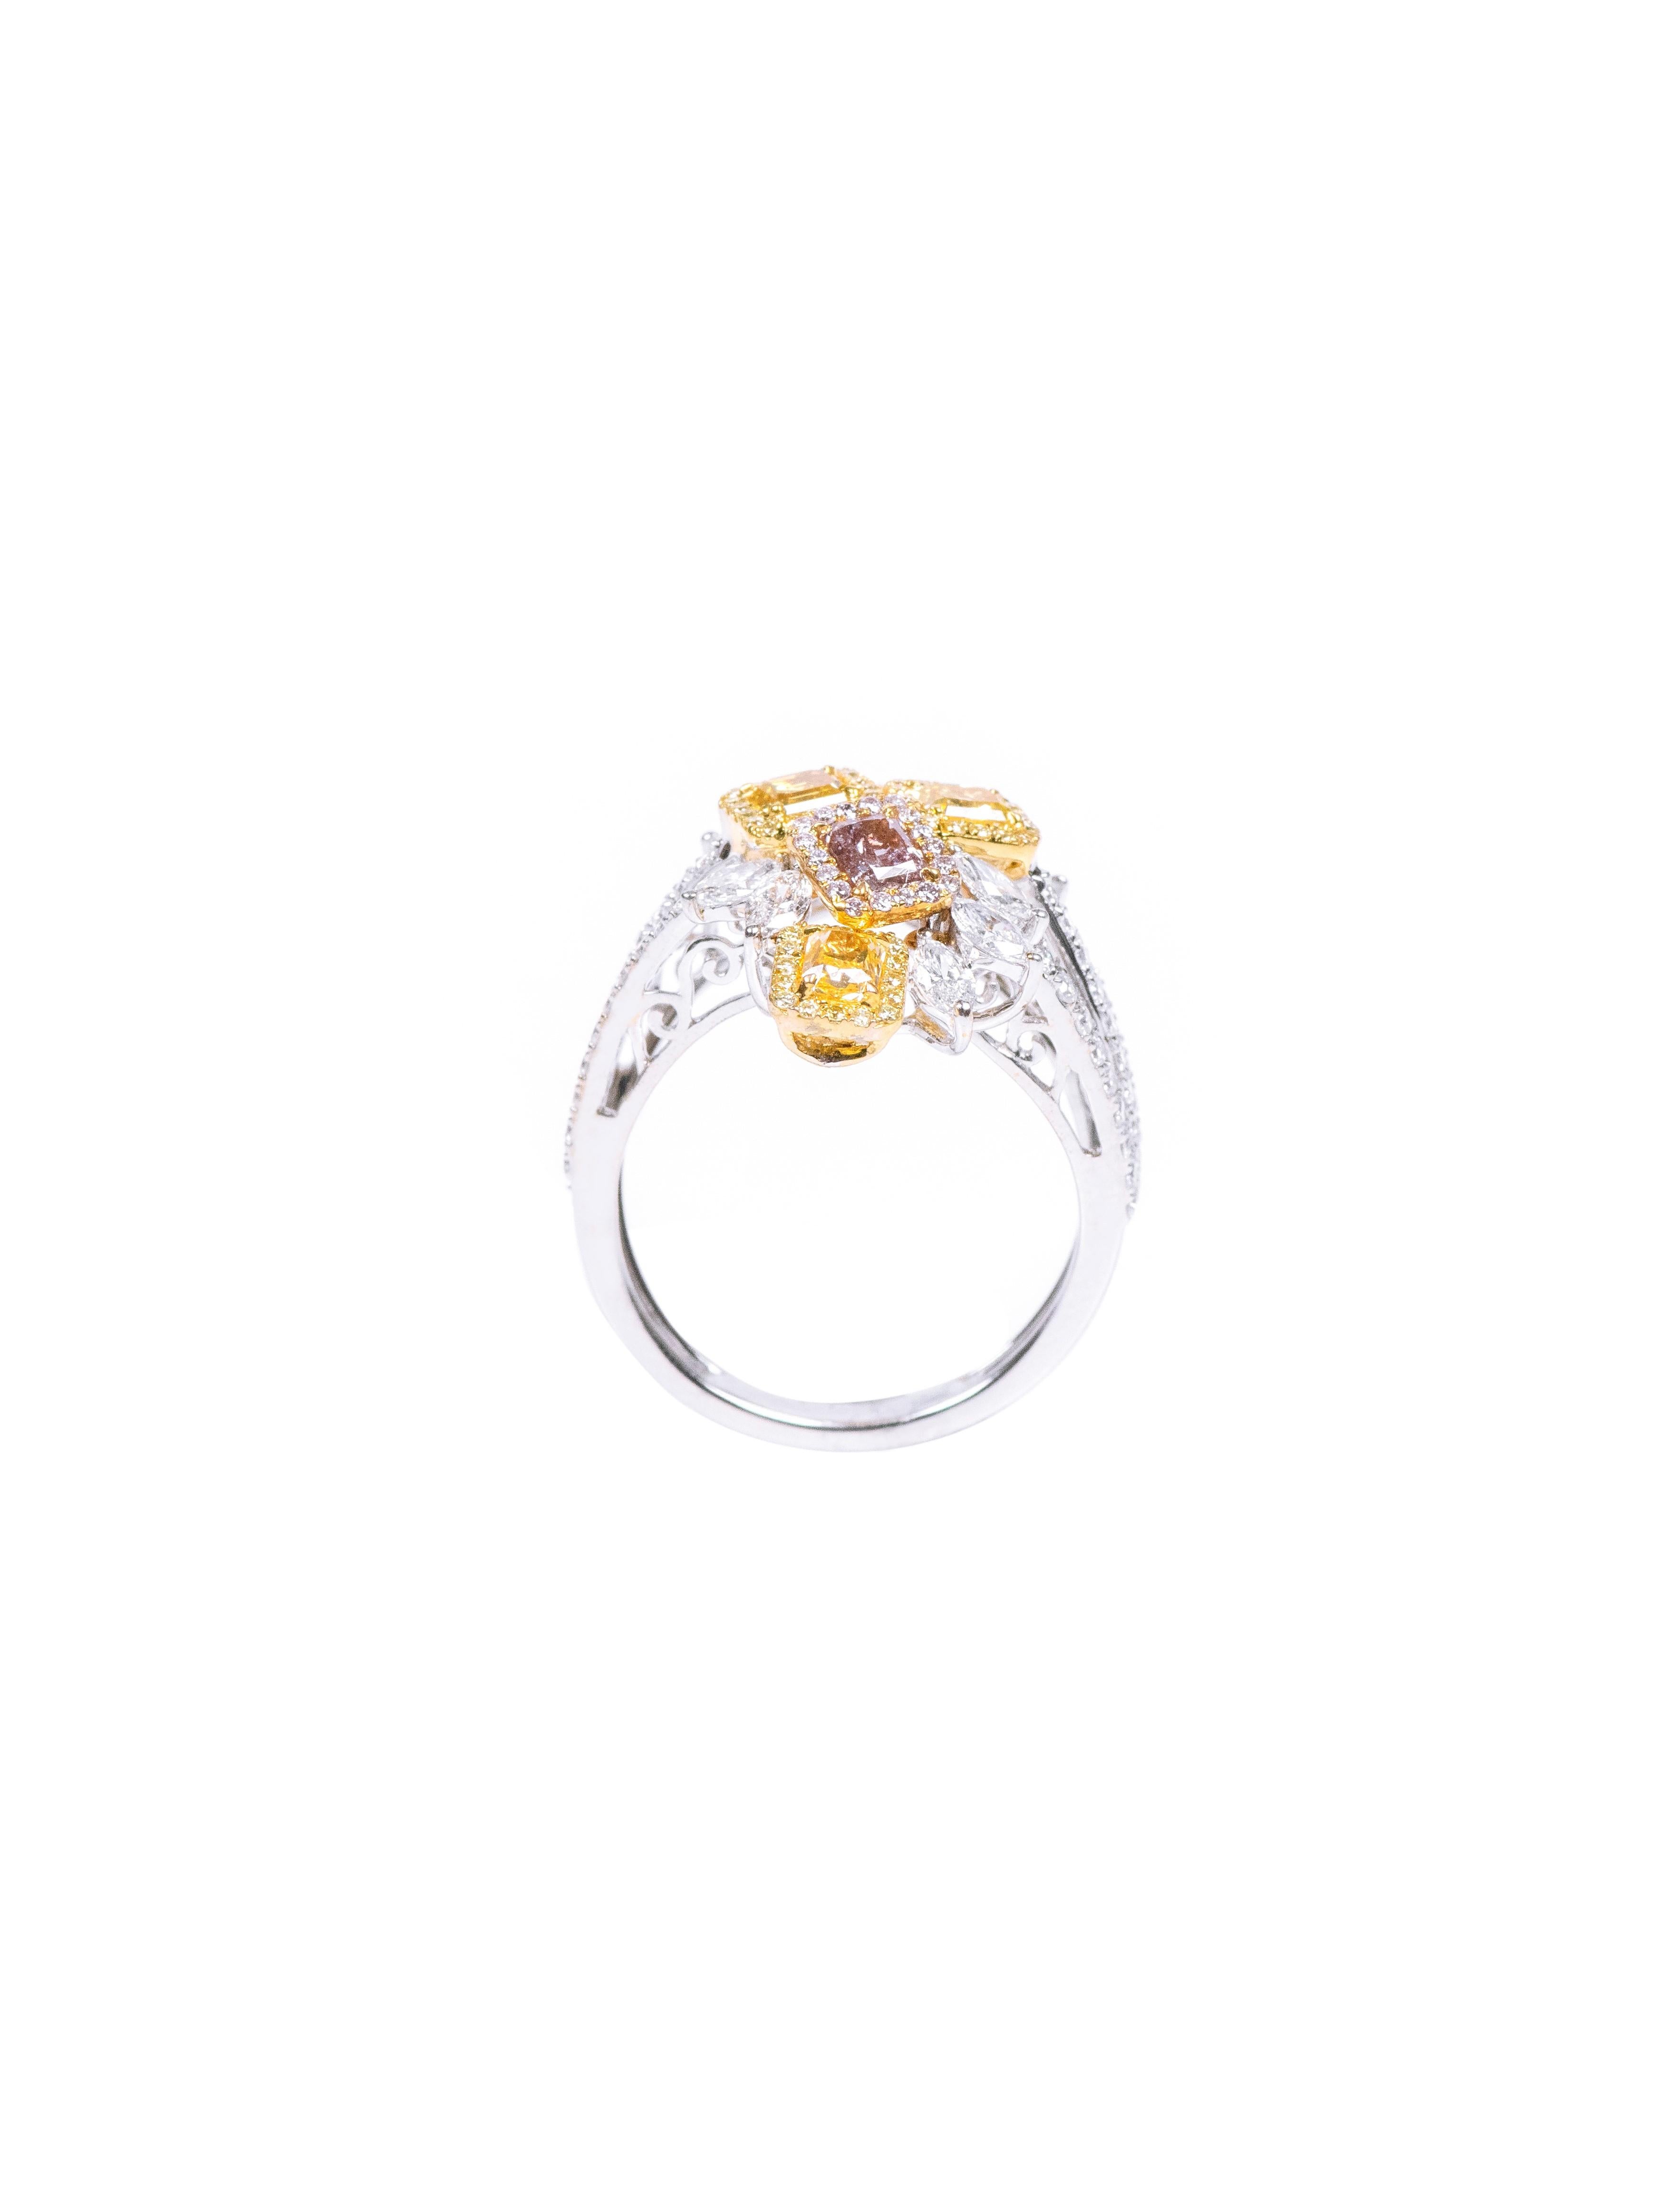 18 Karat Gold 2.88 Carat Multi-Colored Diamond and Diamond Solitaire Ring  For Sale 2